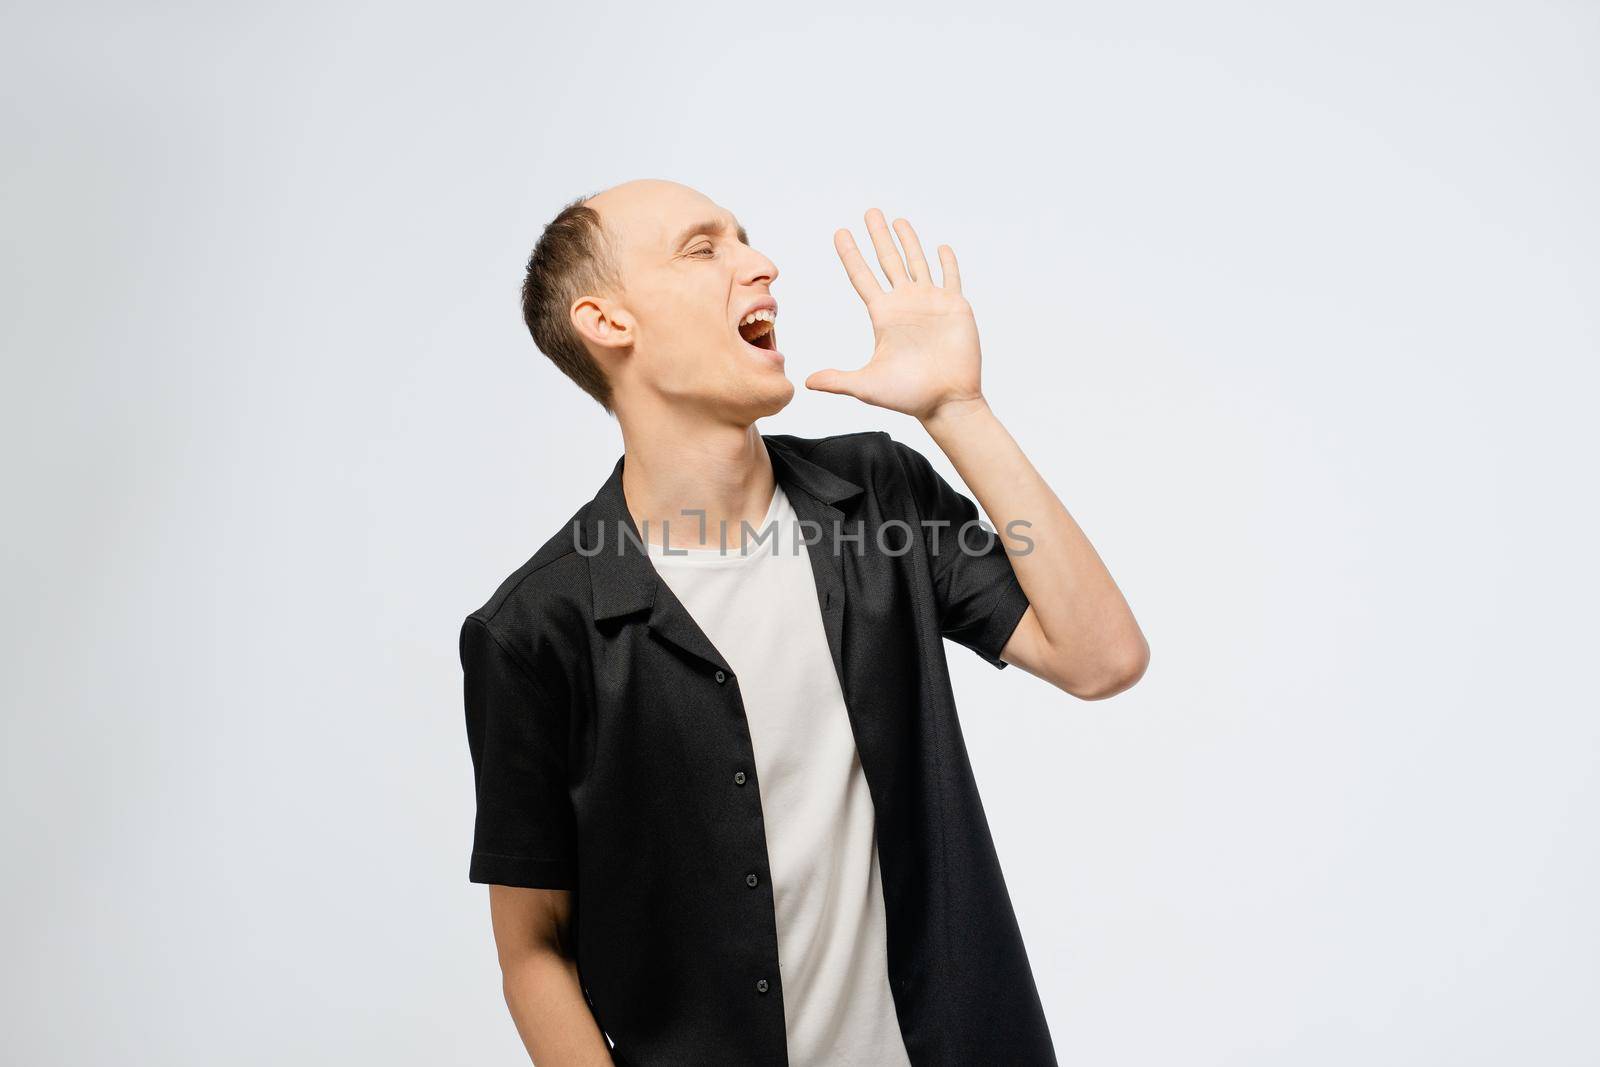 Portrait of a young half bald man wearing black shirt with white t-shirt underneath. Excited young adult happy man showing satisfaction with hands over white background in studio.